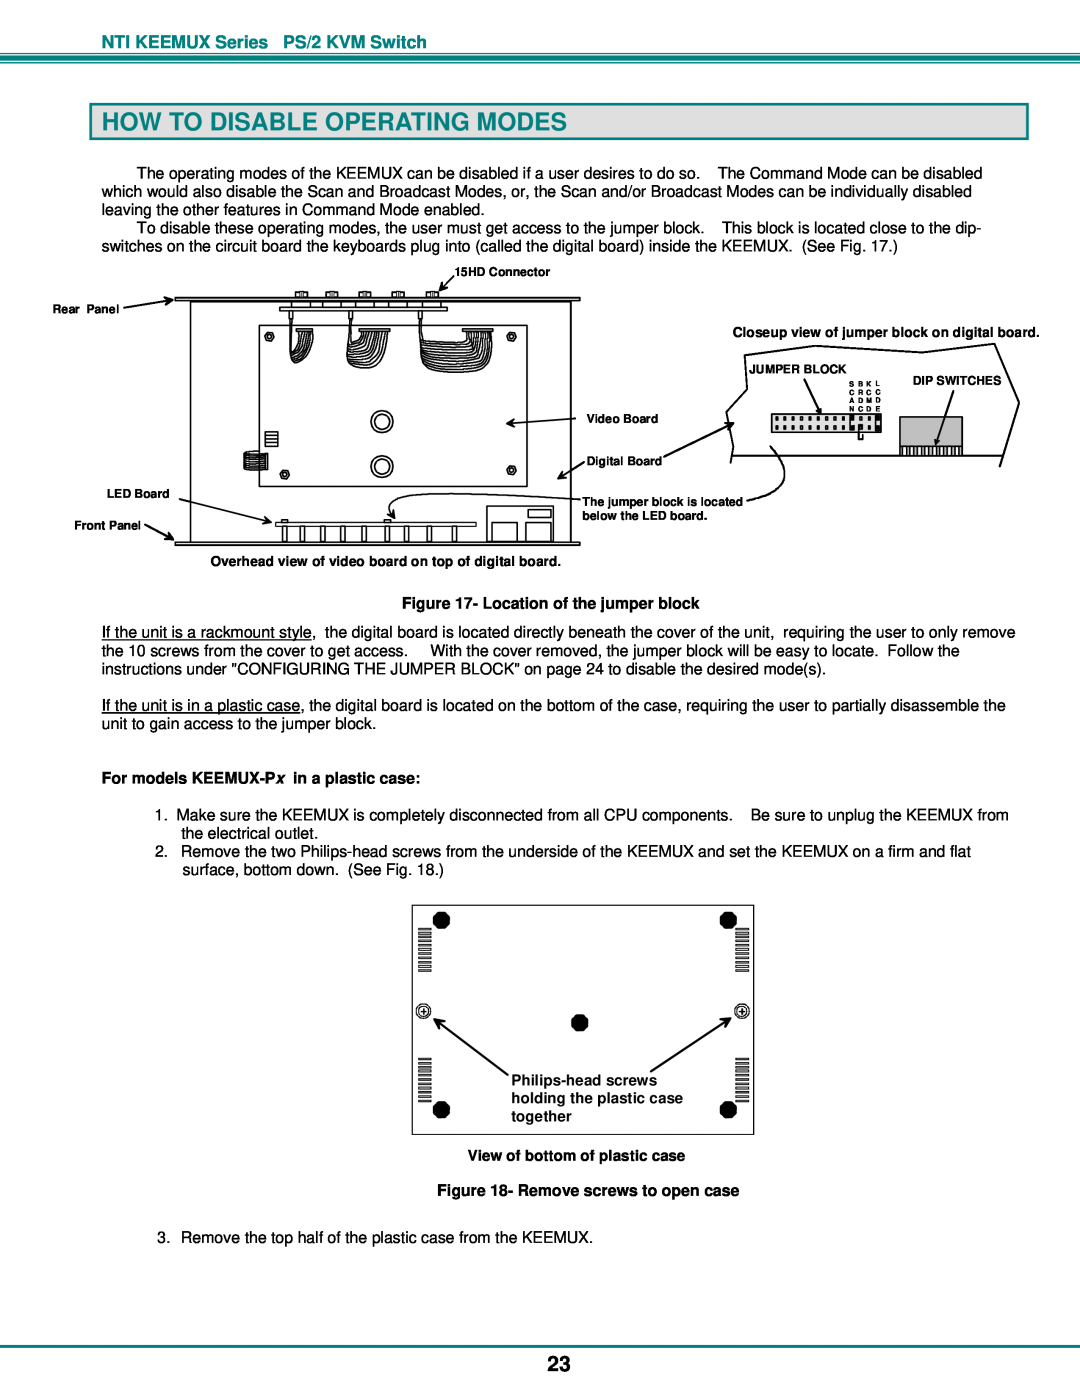 Network Technologies PS/2 KVM How To Disable Operating Modes, Location of the jumper block, Remove screws to open case 